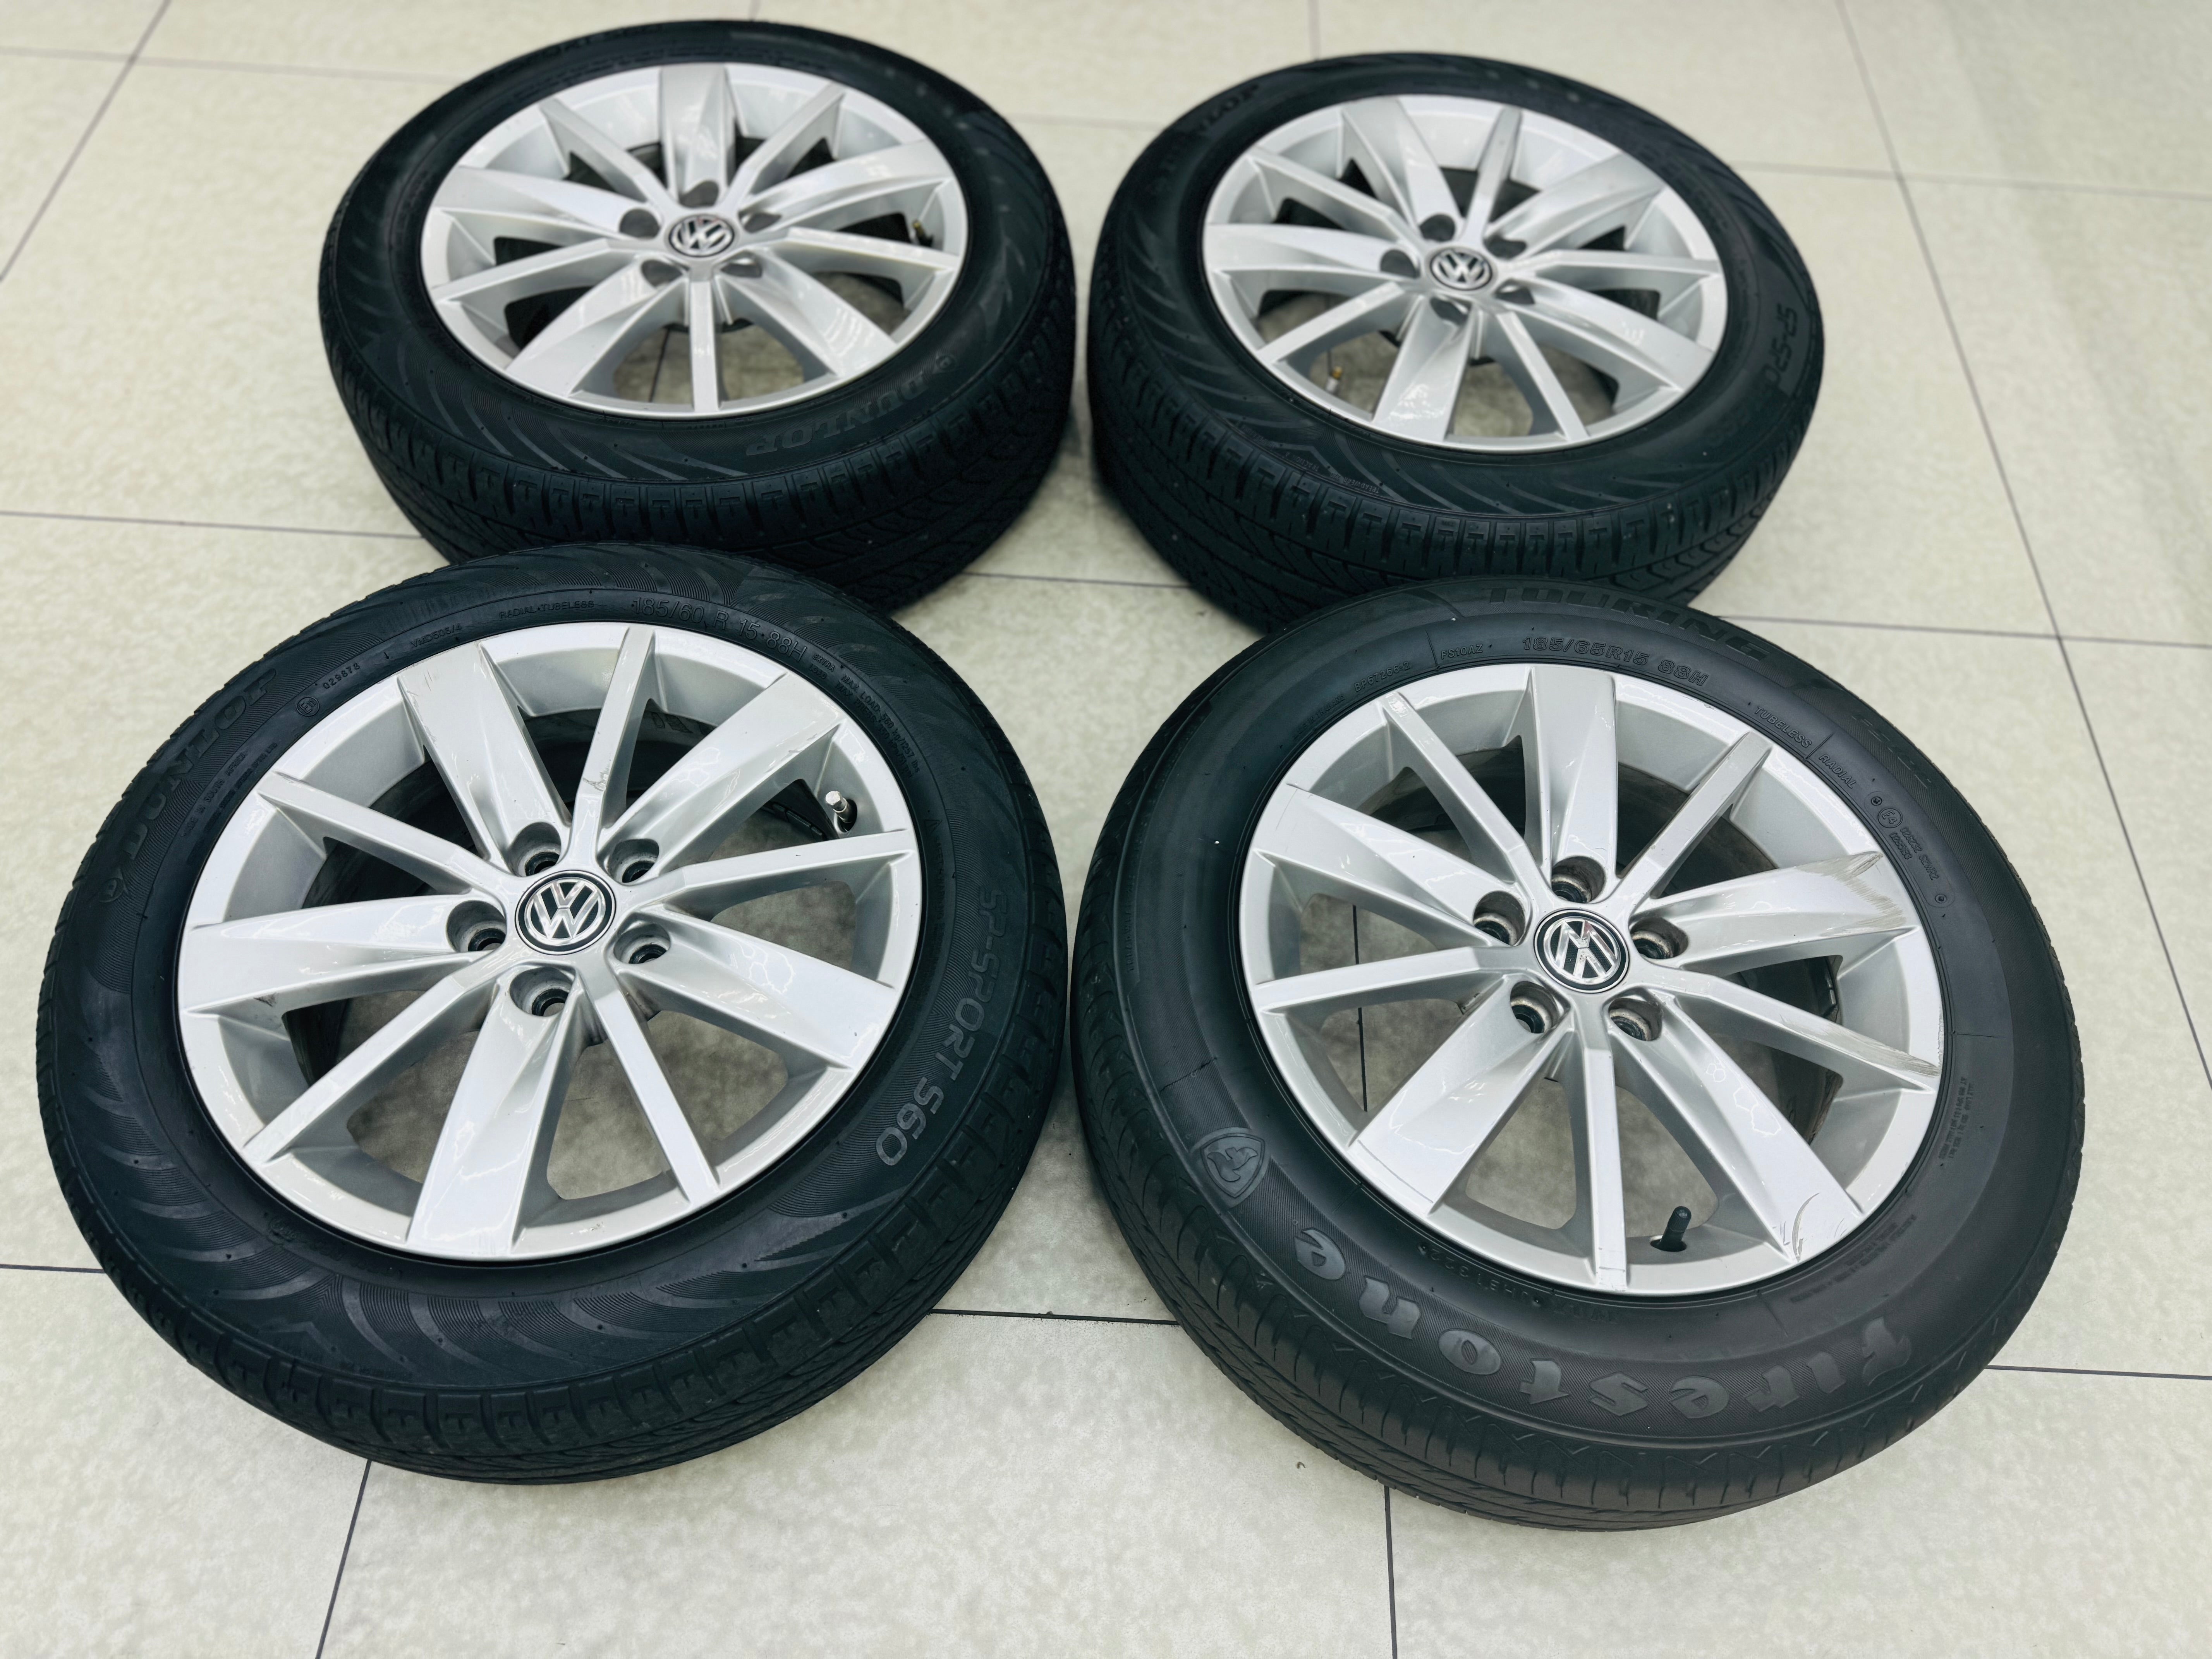 15” POLO 6r OEM  5/100 pre owned mags & tyres